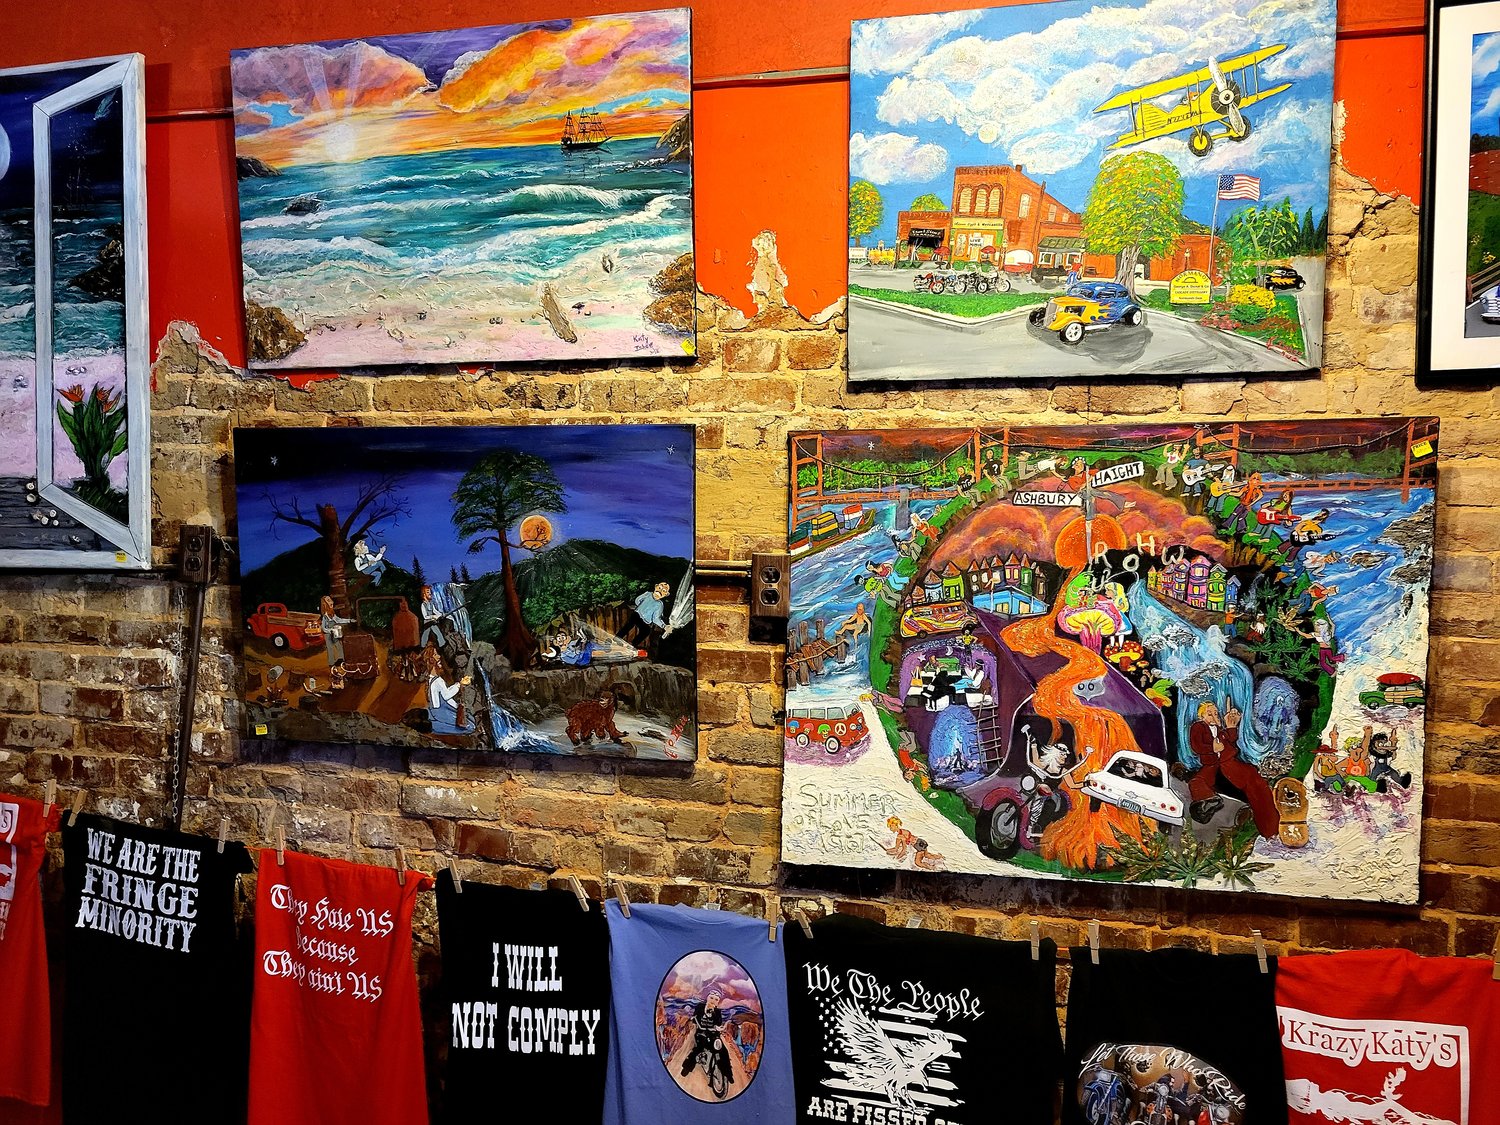 Katy Ishee, whose booth is "Krazy Katy's", would describe her paintings as folk art with "something more happening."